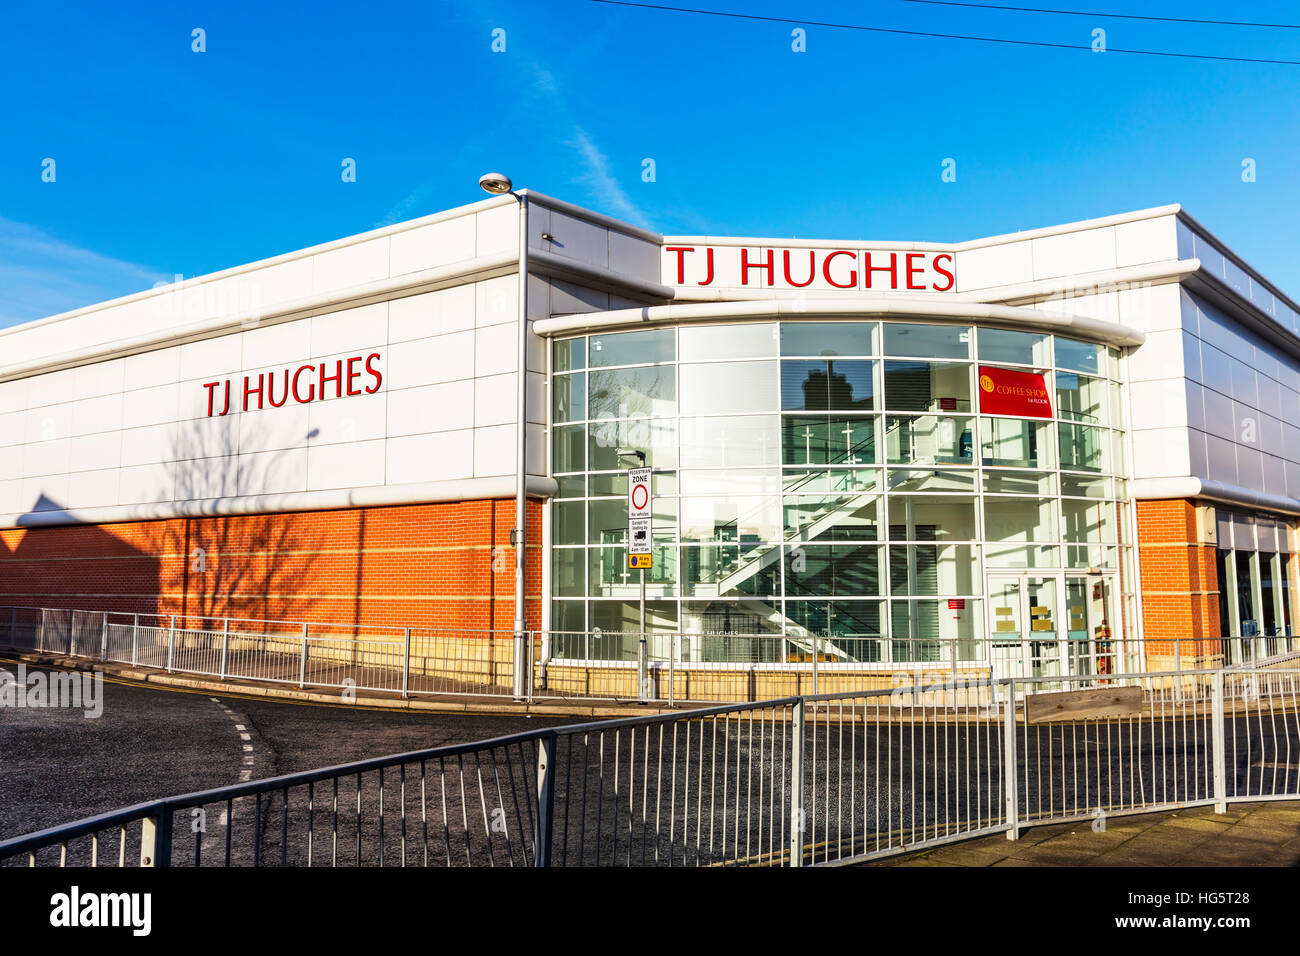 T J Hughes TJ Hughes retail store shop building sign Scunthorpe town in North Lincolnshire, England UK Stock Photo